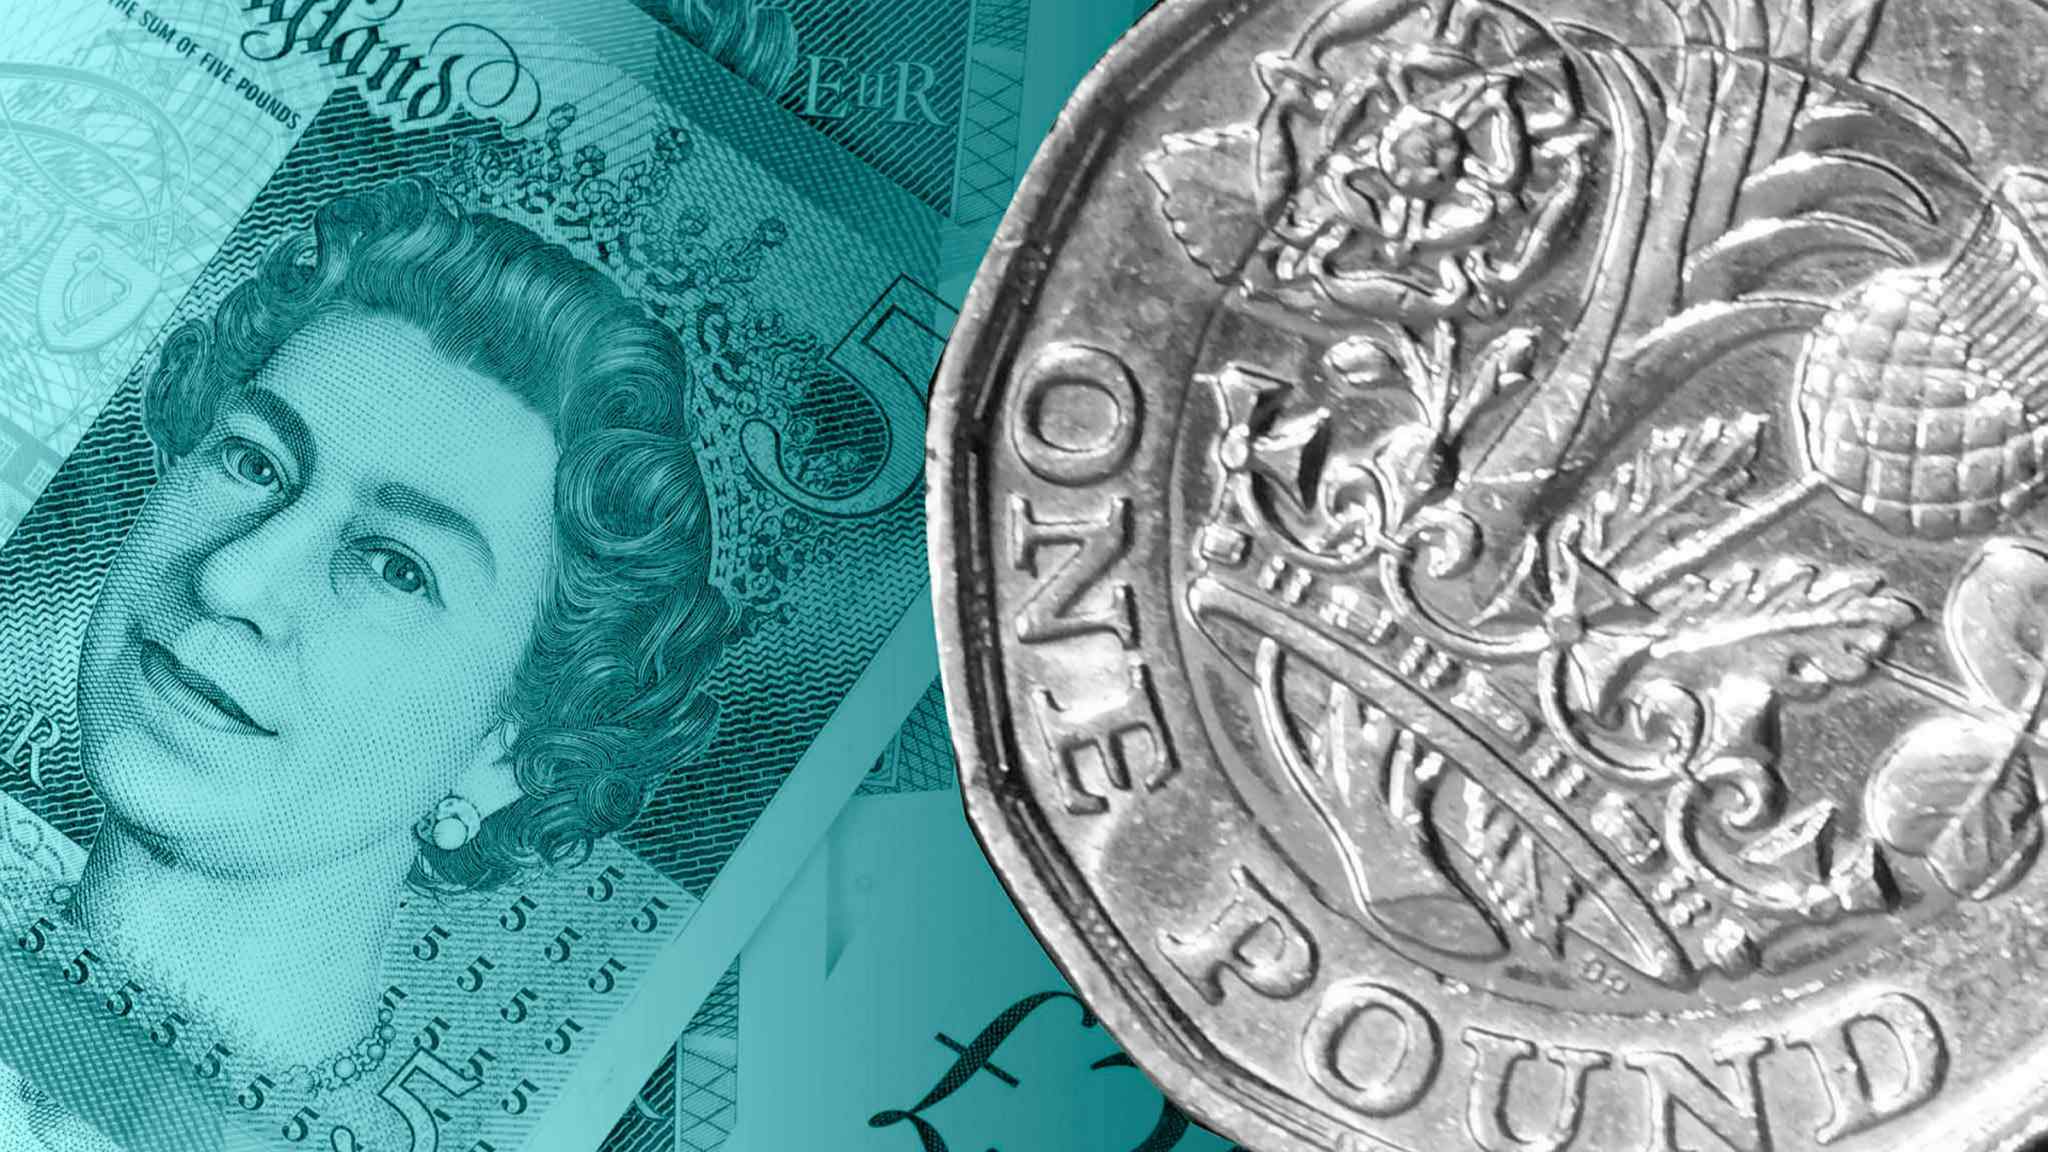 Pound traders look past UK political turmoil